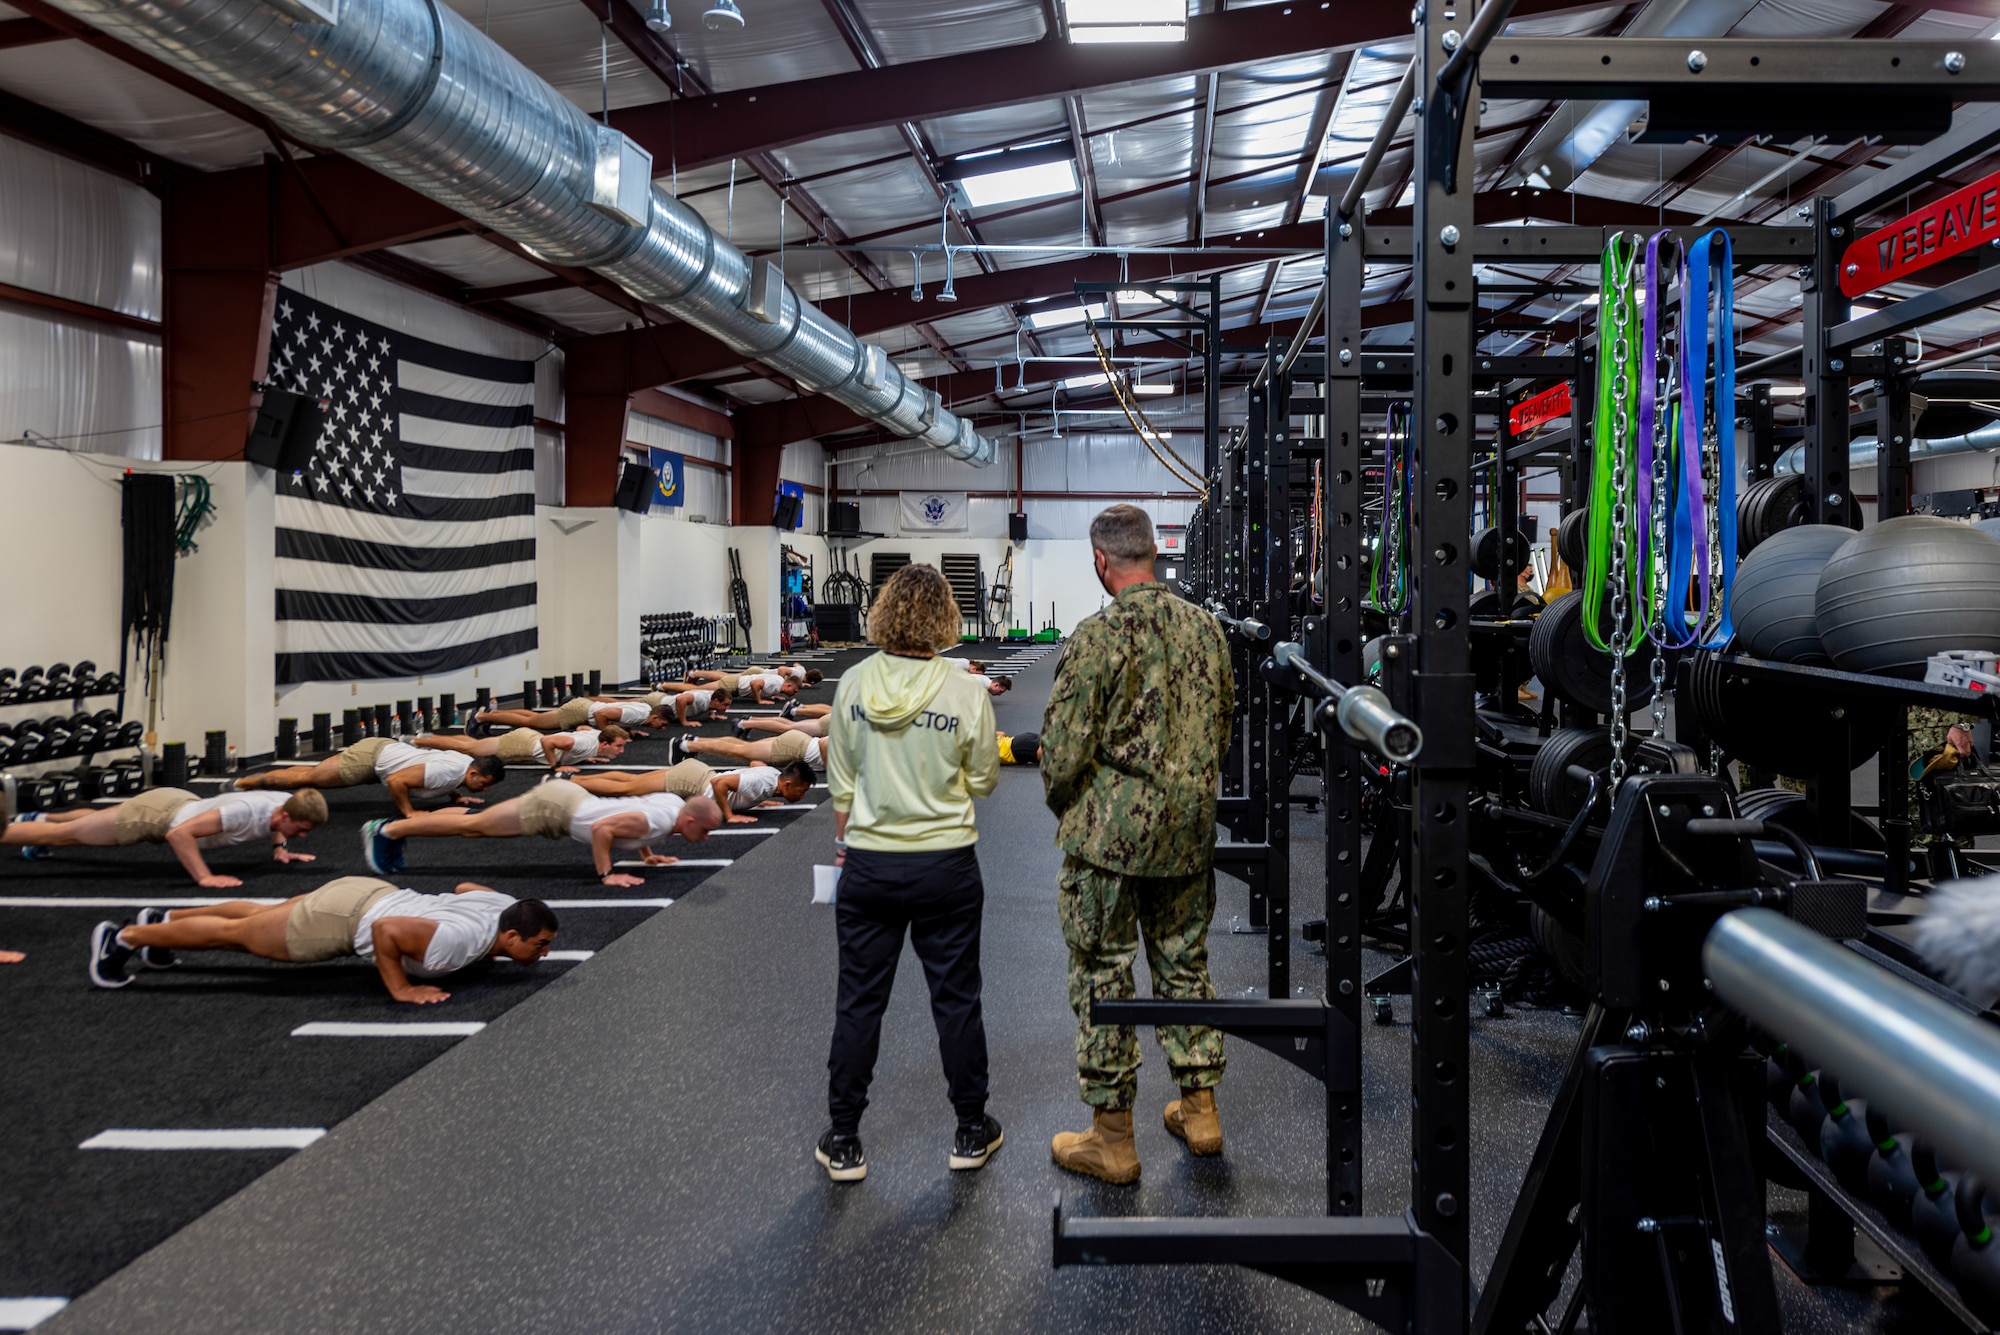 New fitness facility pictured with flight of students performing pushups while 2 people observe.